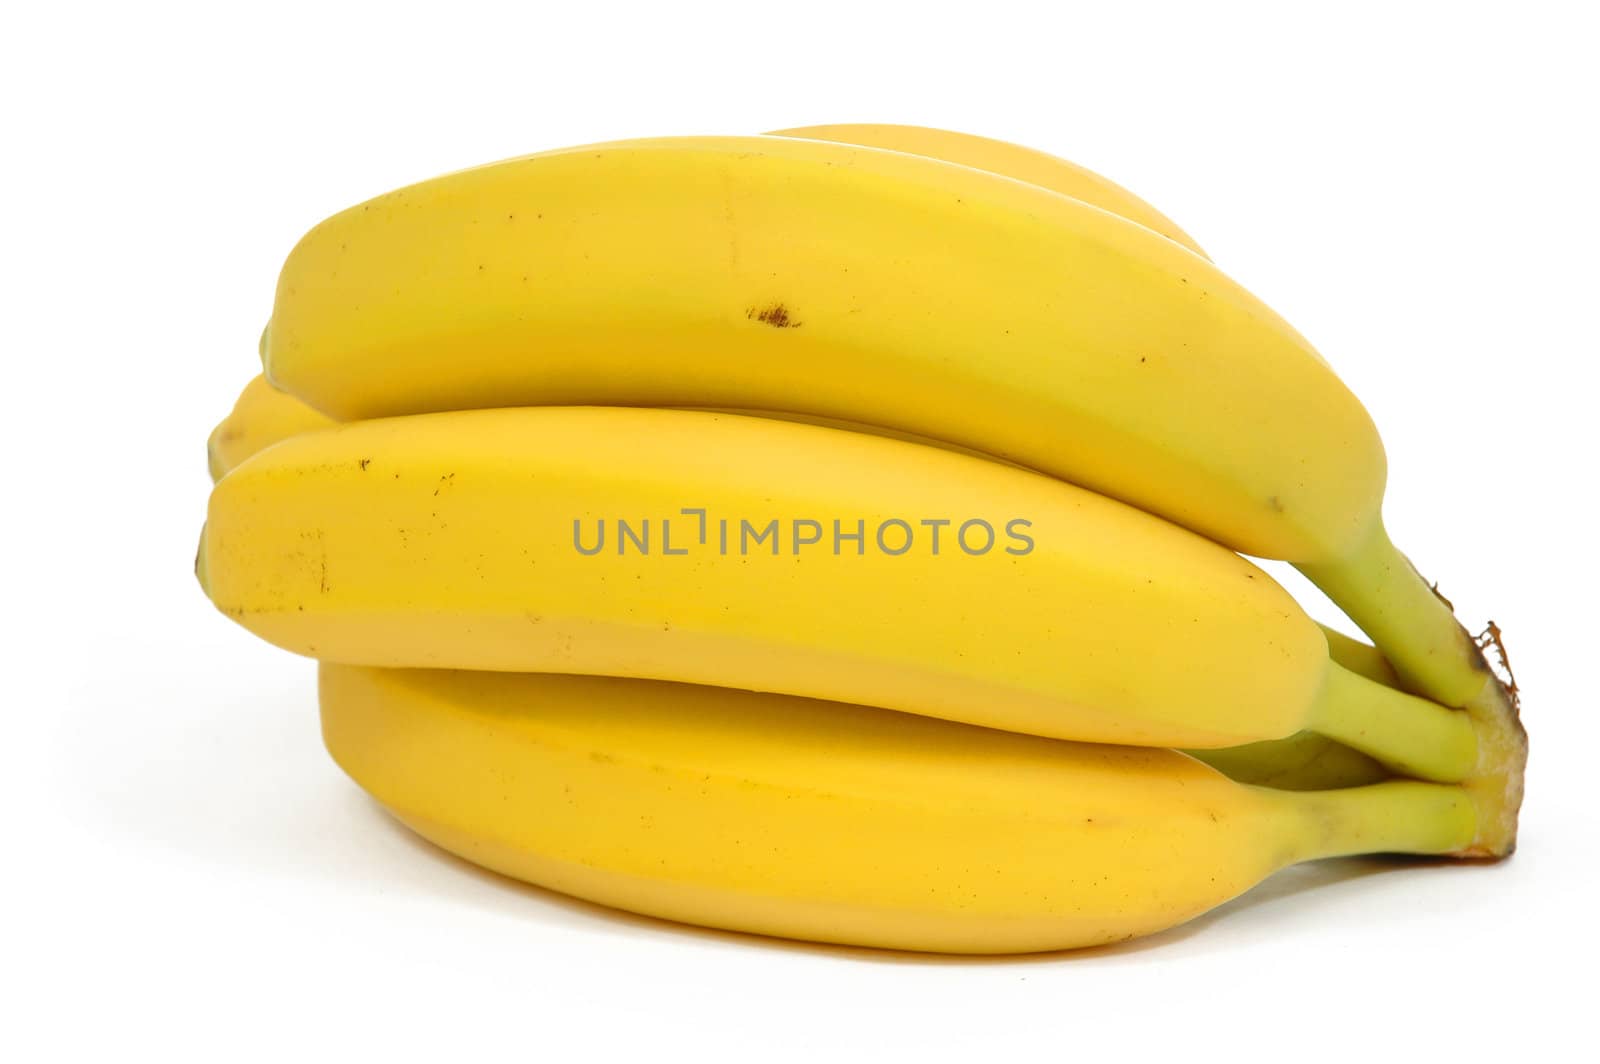 Bunch of bananas by cfoto